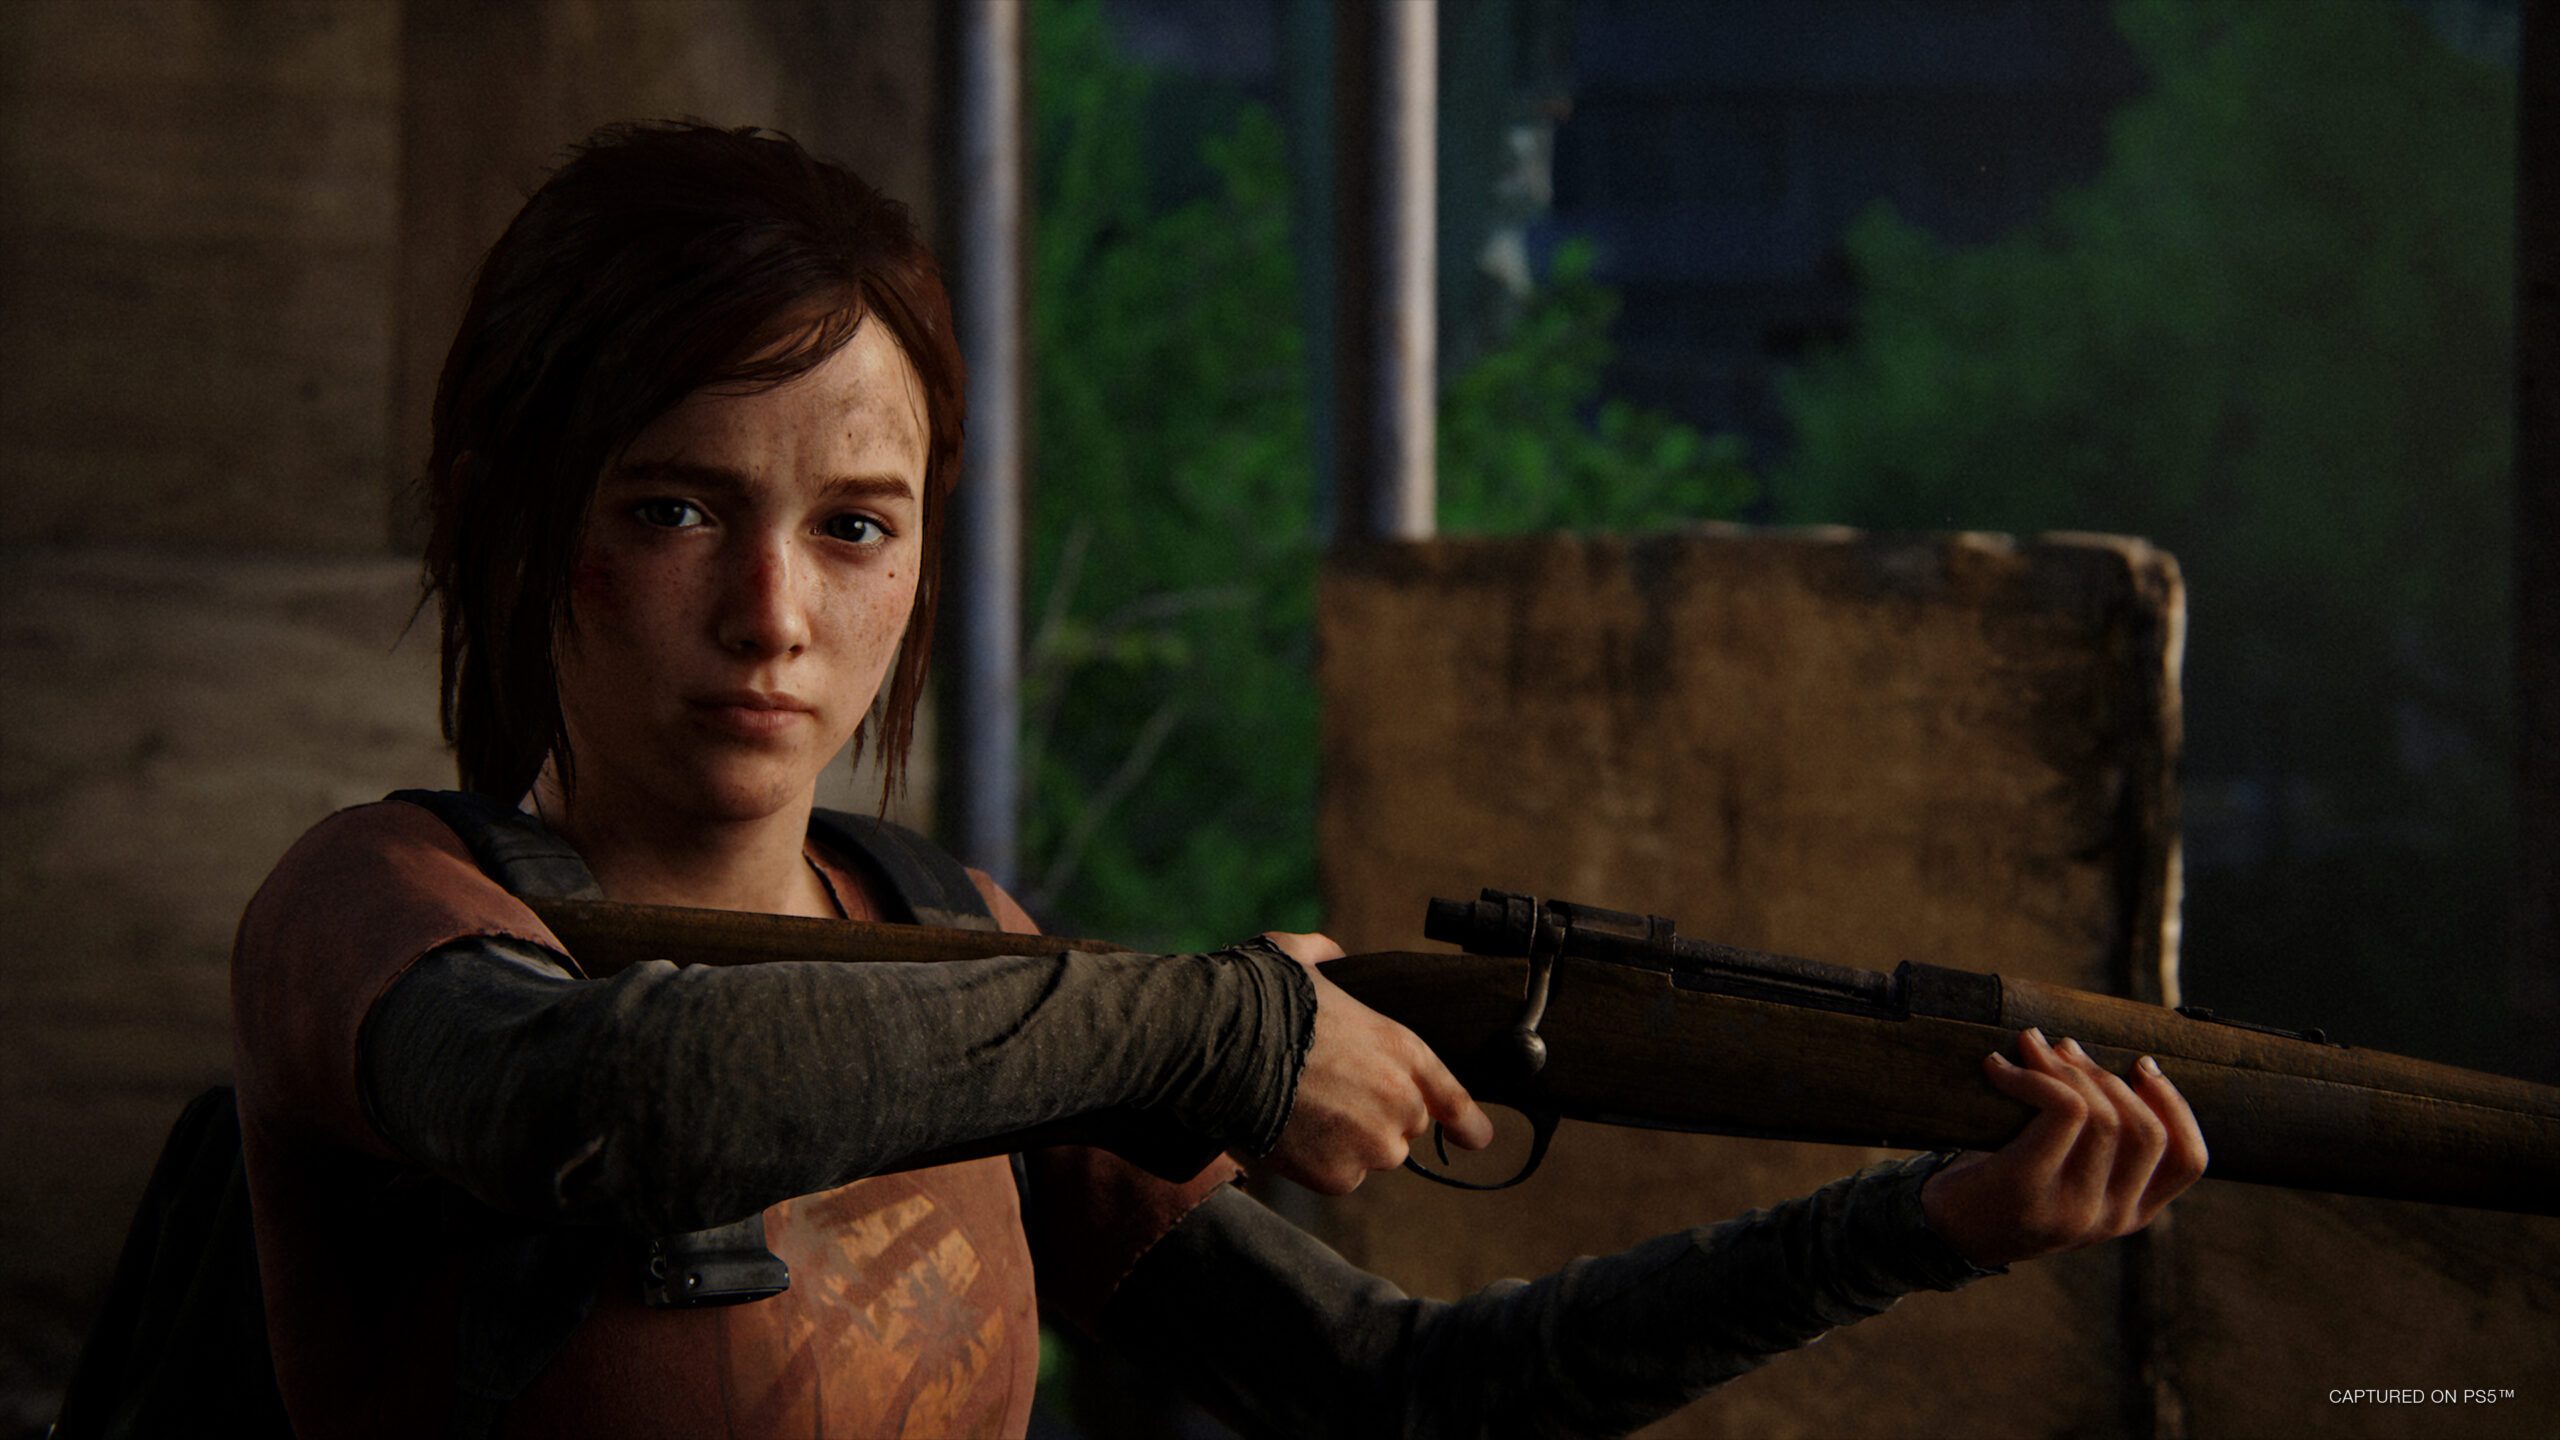 The Last of Us Part II Ellie Edition Restock, PAX East Hands-on, and More –  PlayStation.Blog